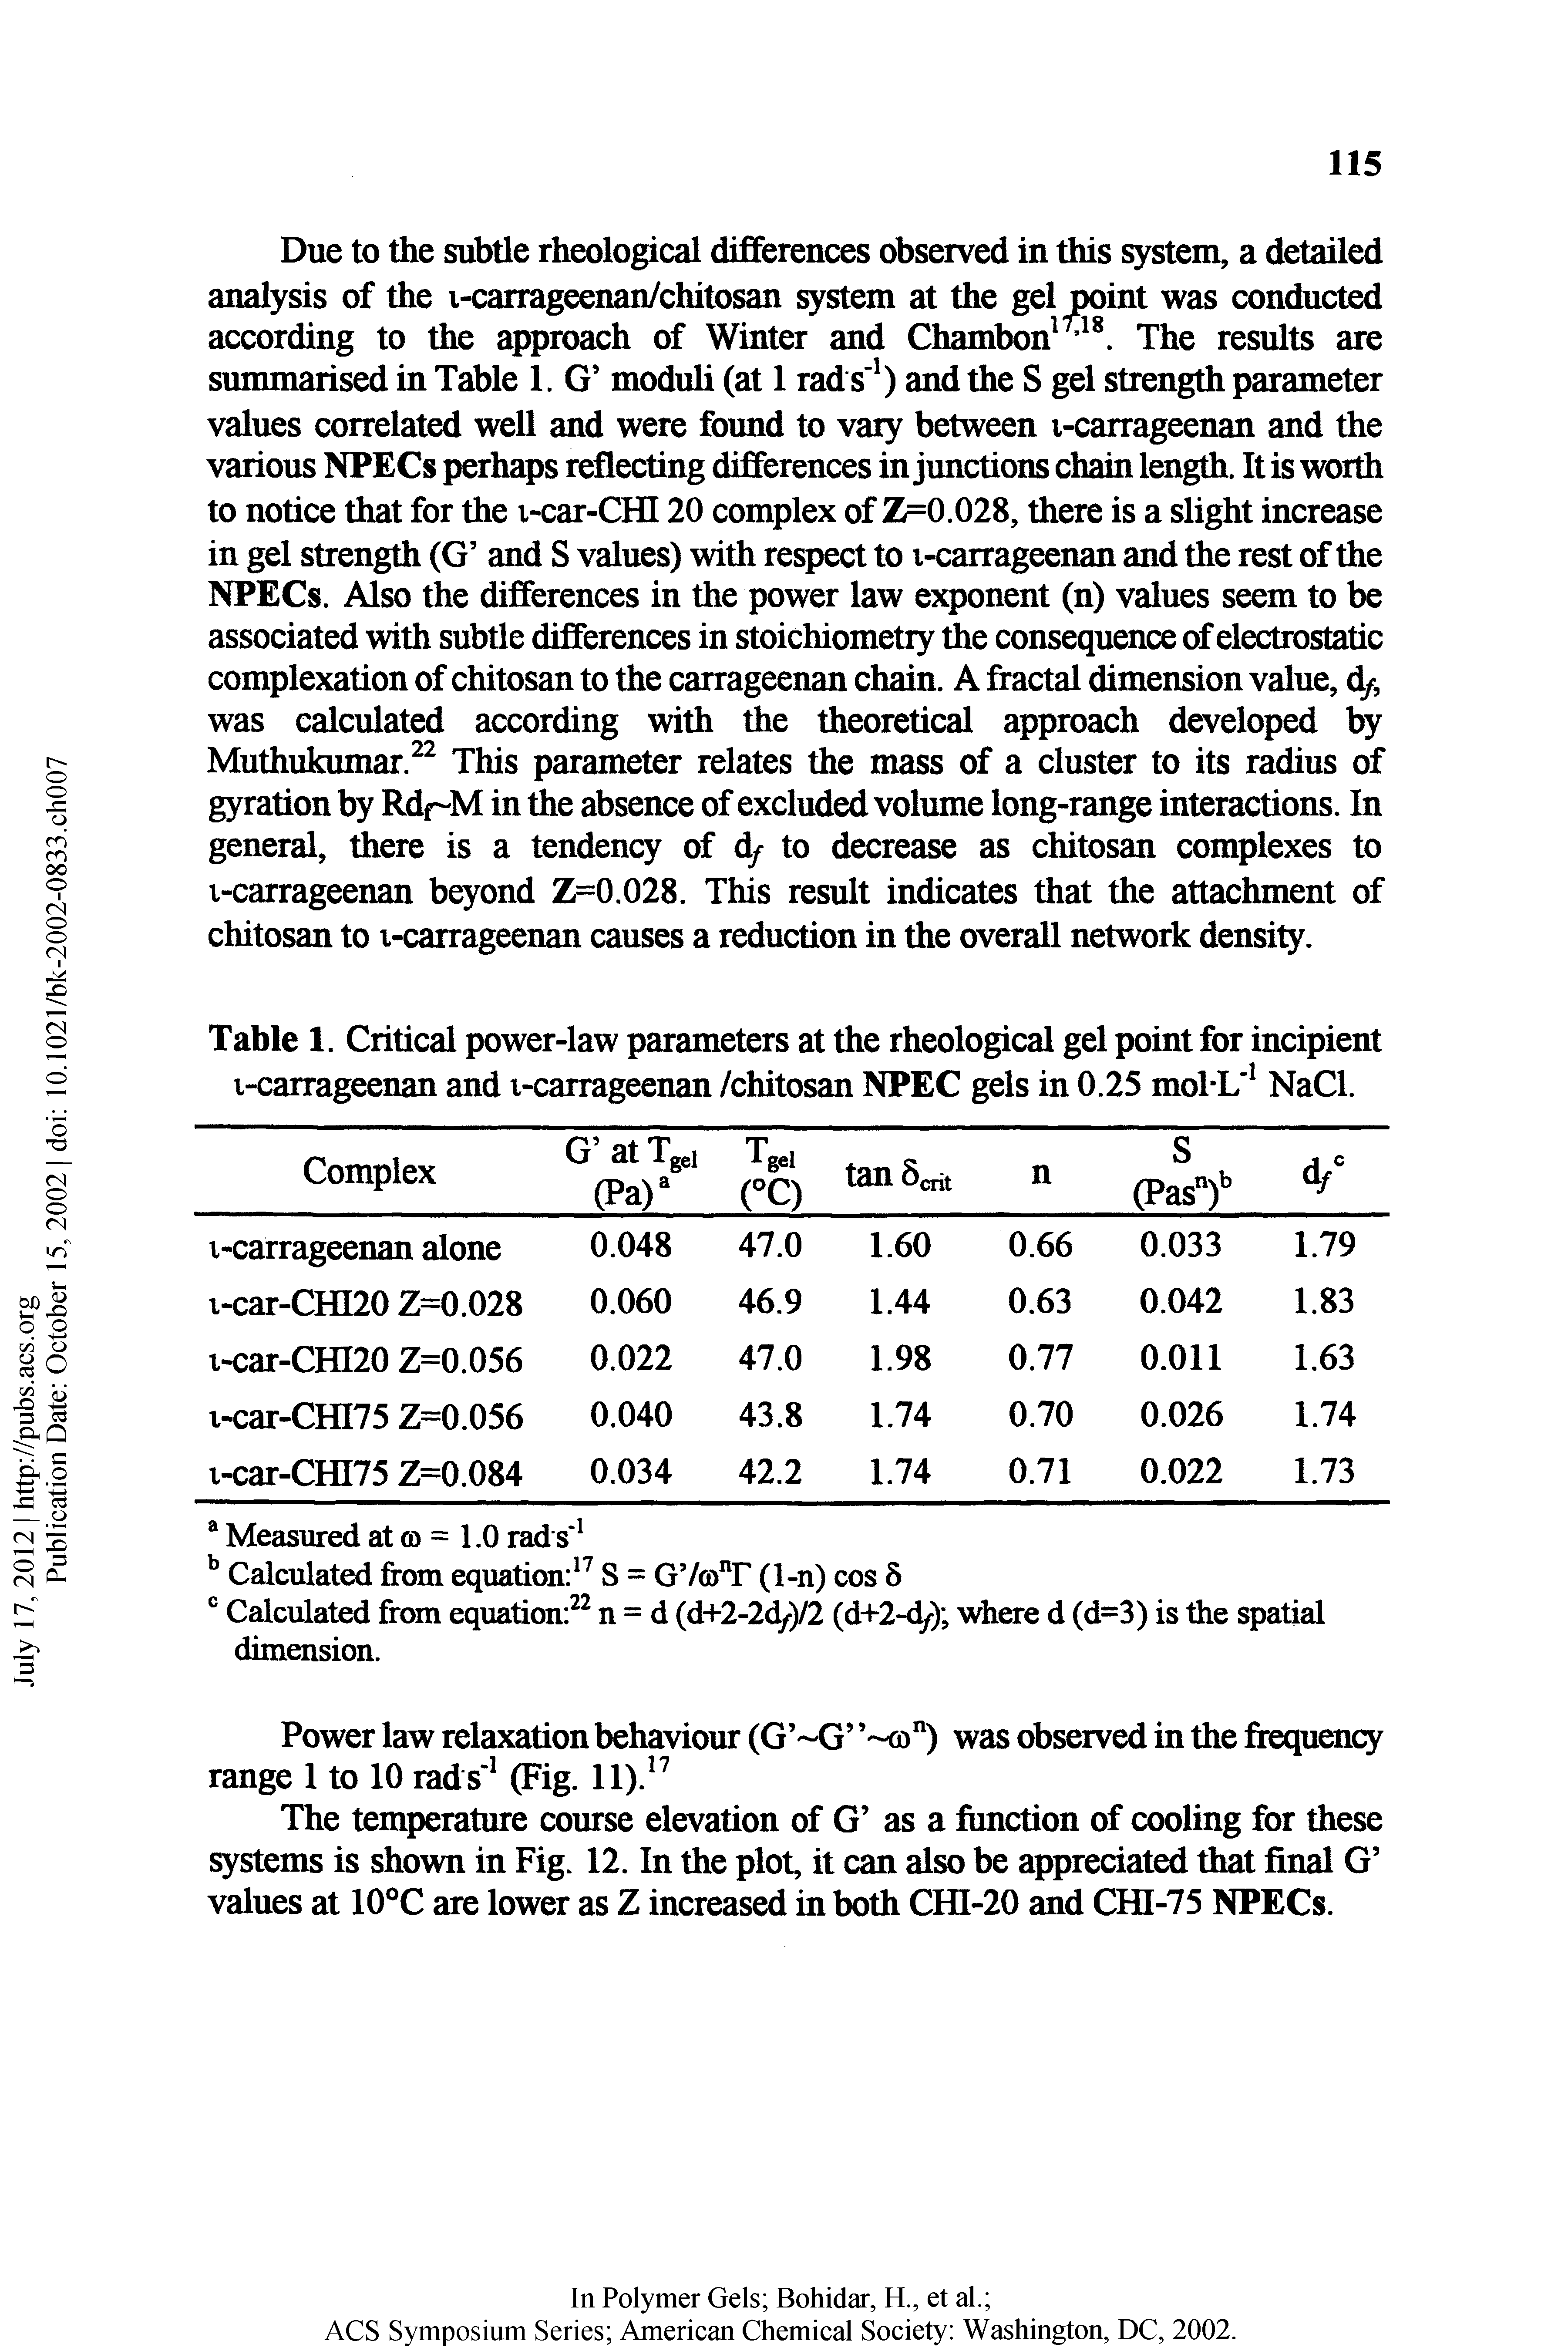 Table 1. Critical power-law parameters at the rheological gel point for incipient i-carrageenan and t-carrageenan /chitosan NPEC gels in 0.25 mol-L NaCl.